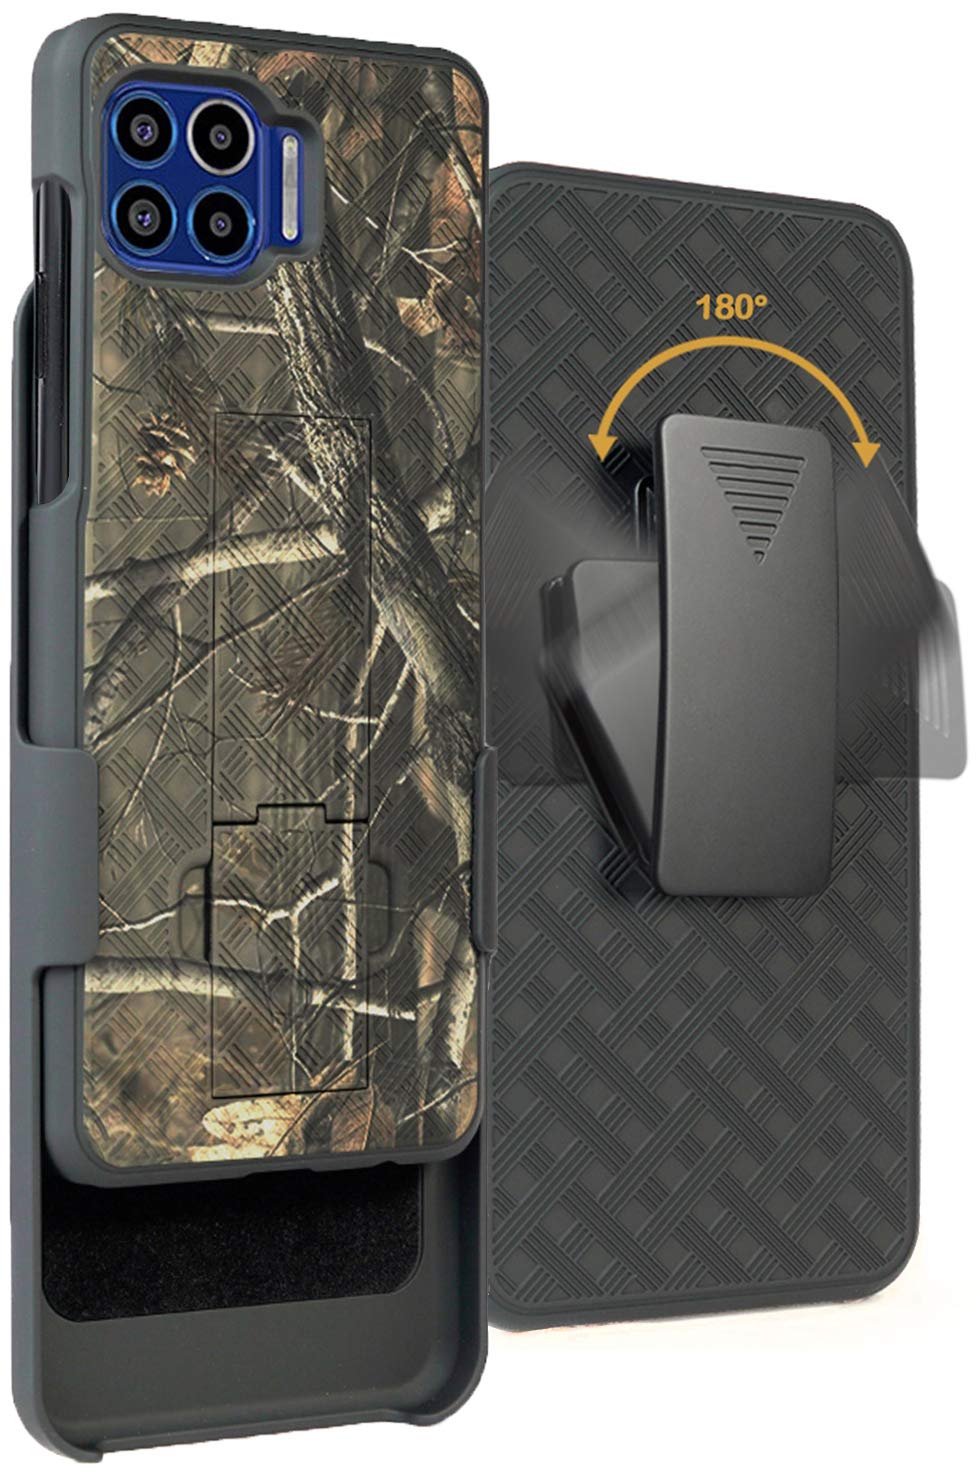 Case with Clip for Moto One 5G, Nakedcellphone [Outdoor Camouflage] Tree Leaf Real Woods Camo Cover with Kickstand and Belt Hip Holster for Motorola Moto One 5G UW Phone XT2075 (aka Moto G 5G Plus)